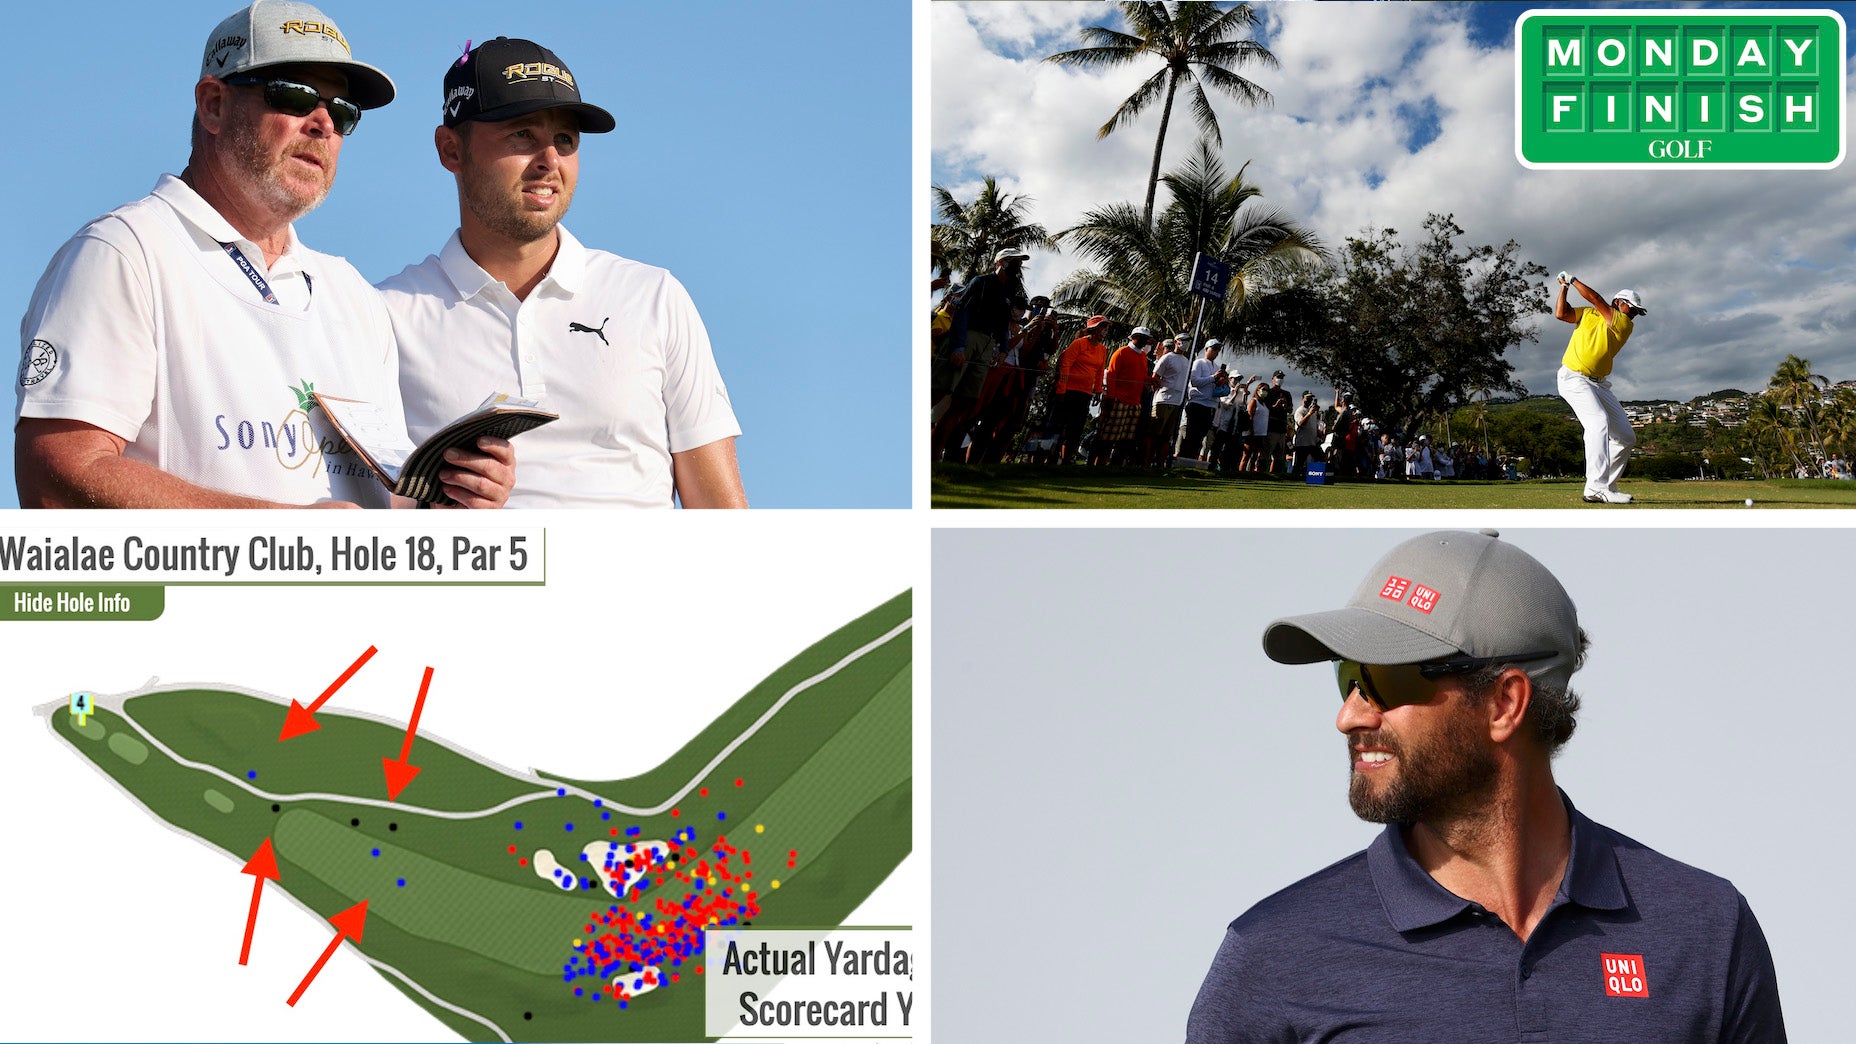 The Sony Open wrapped up on Sunday with plenty of action.